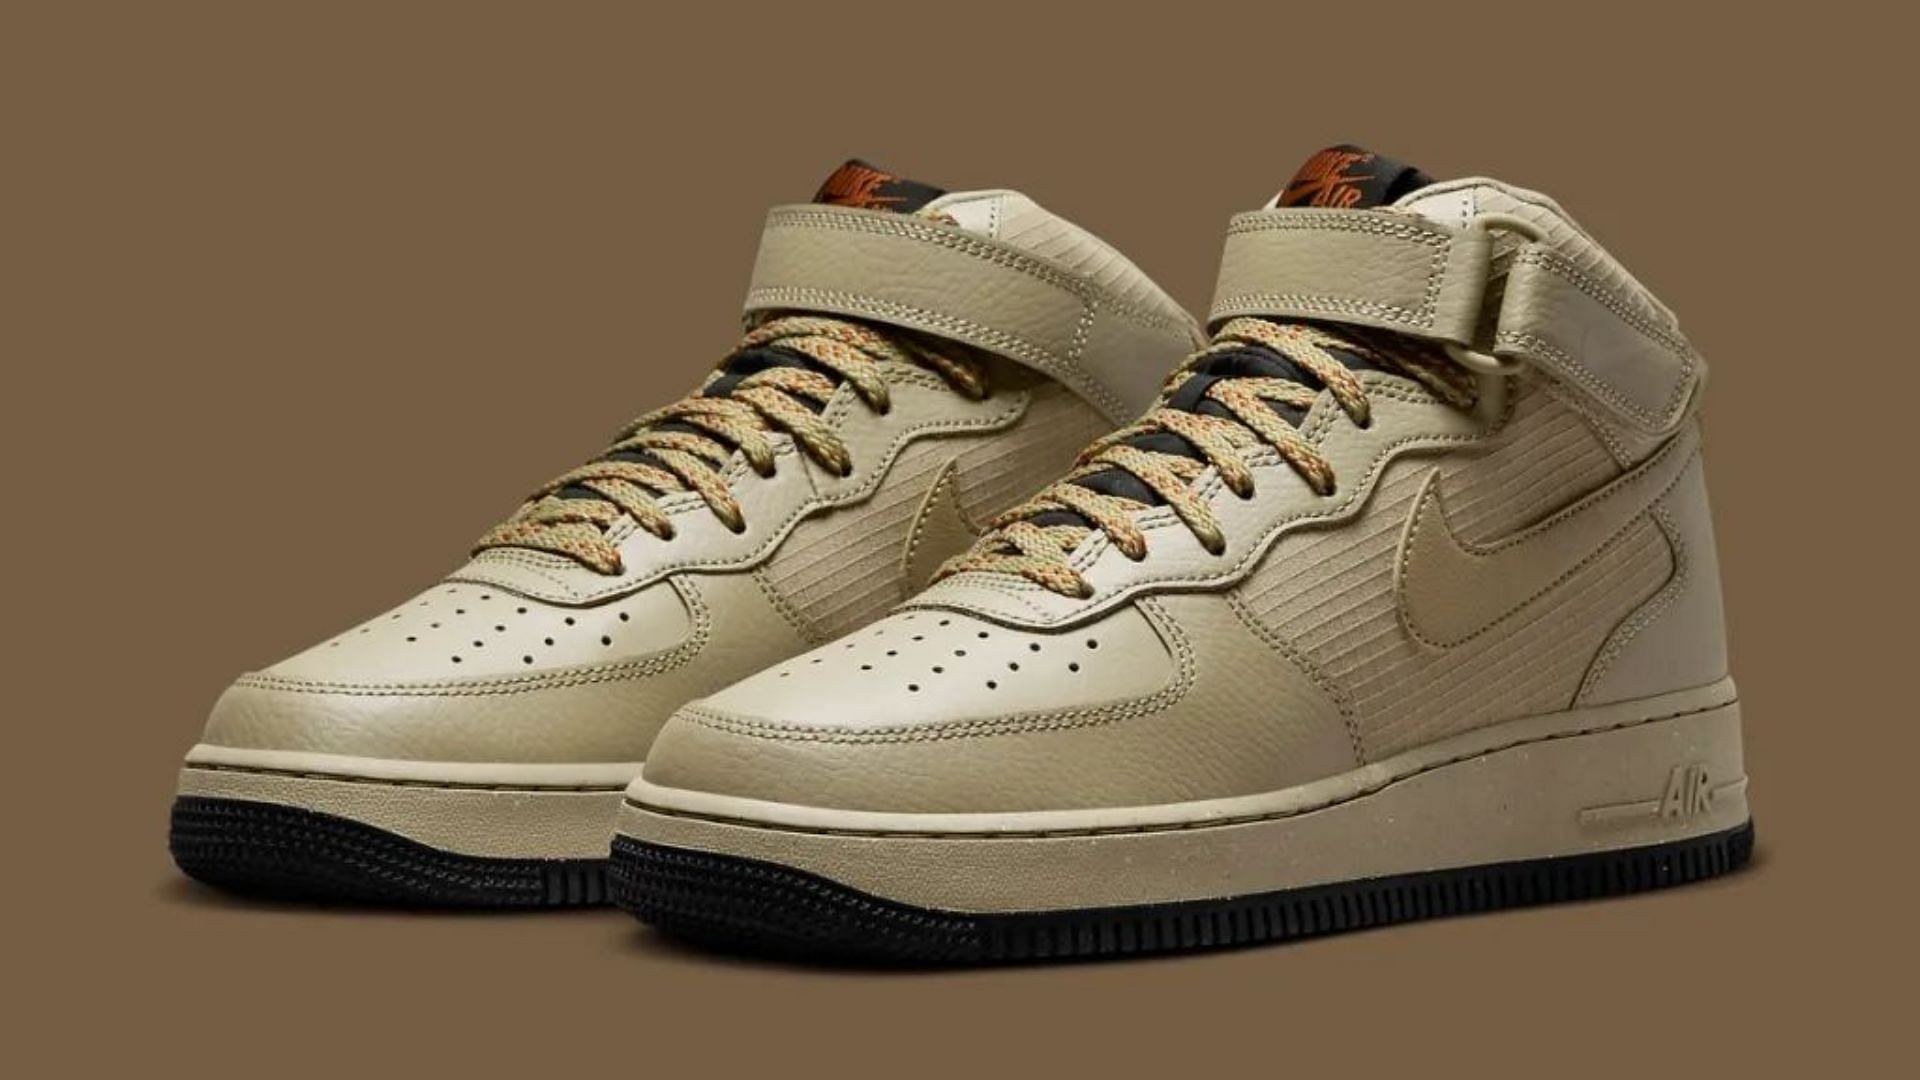 Nike Air Force 1 Mid shoes (Image via House of Heat)